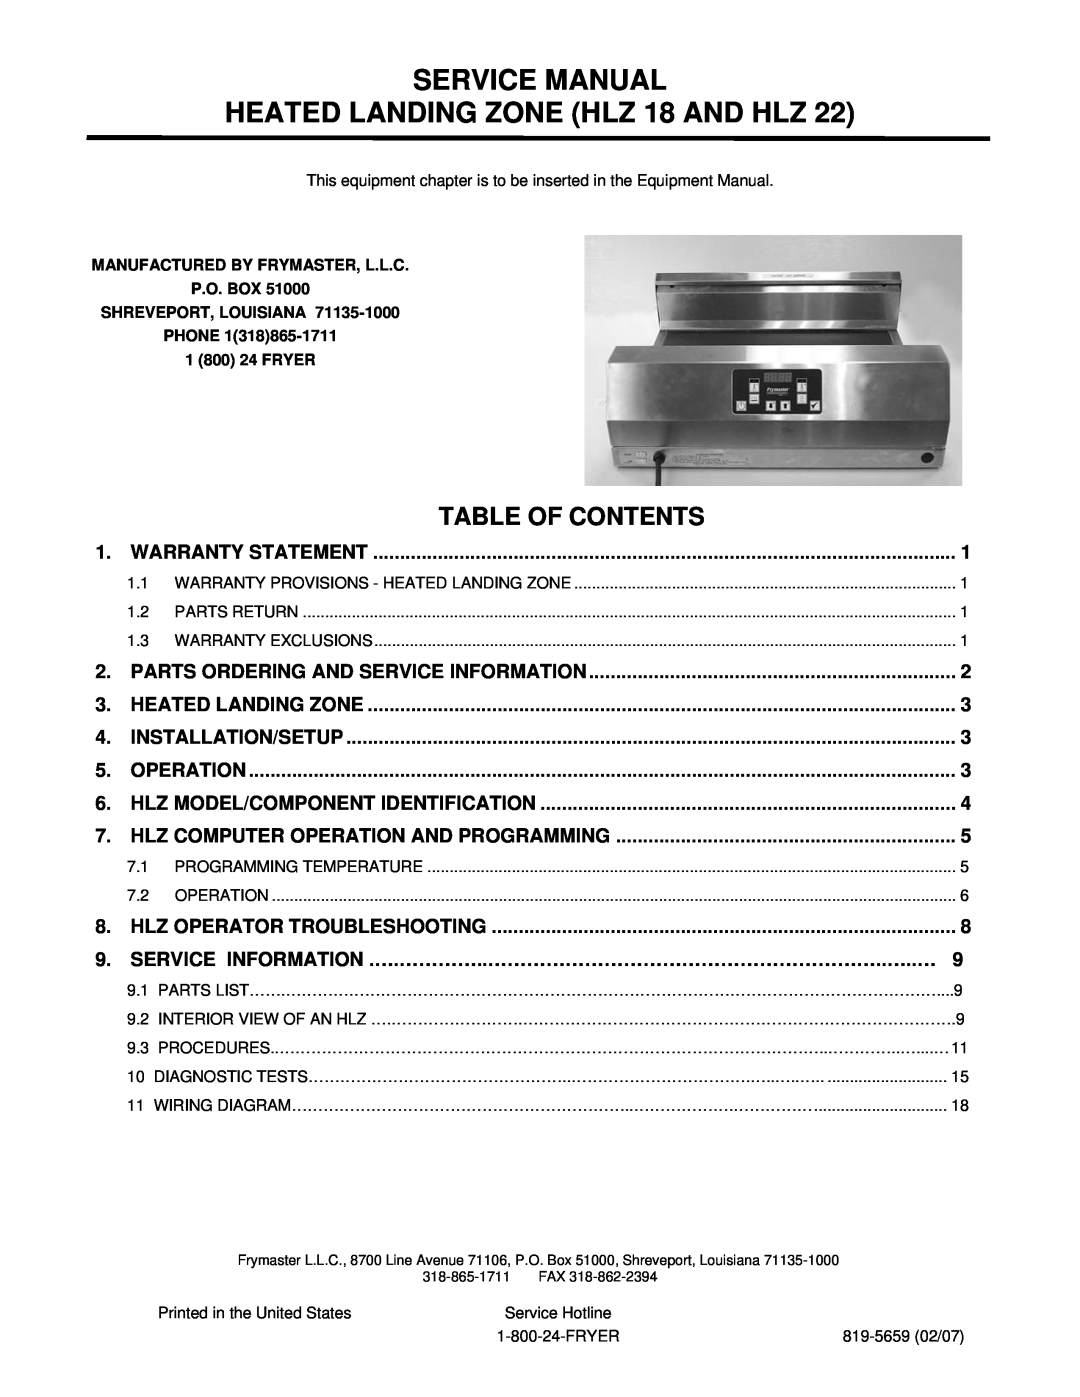 Frymaster HLZ 18, HLZ 22 service manual Table Of Contents 